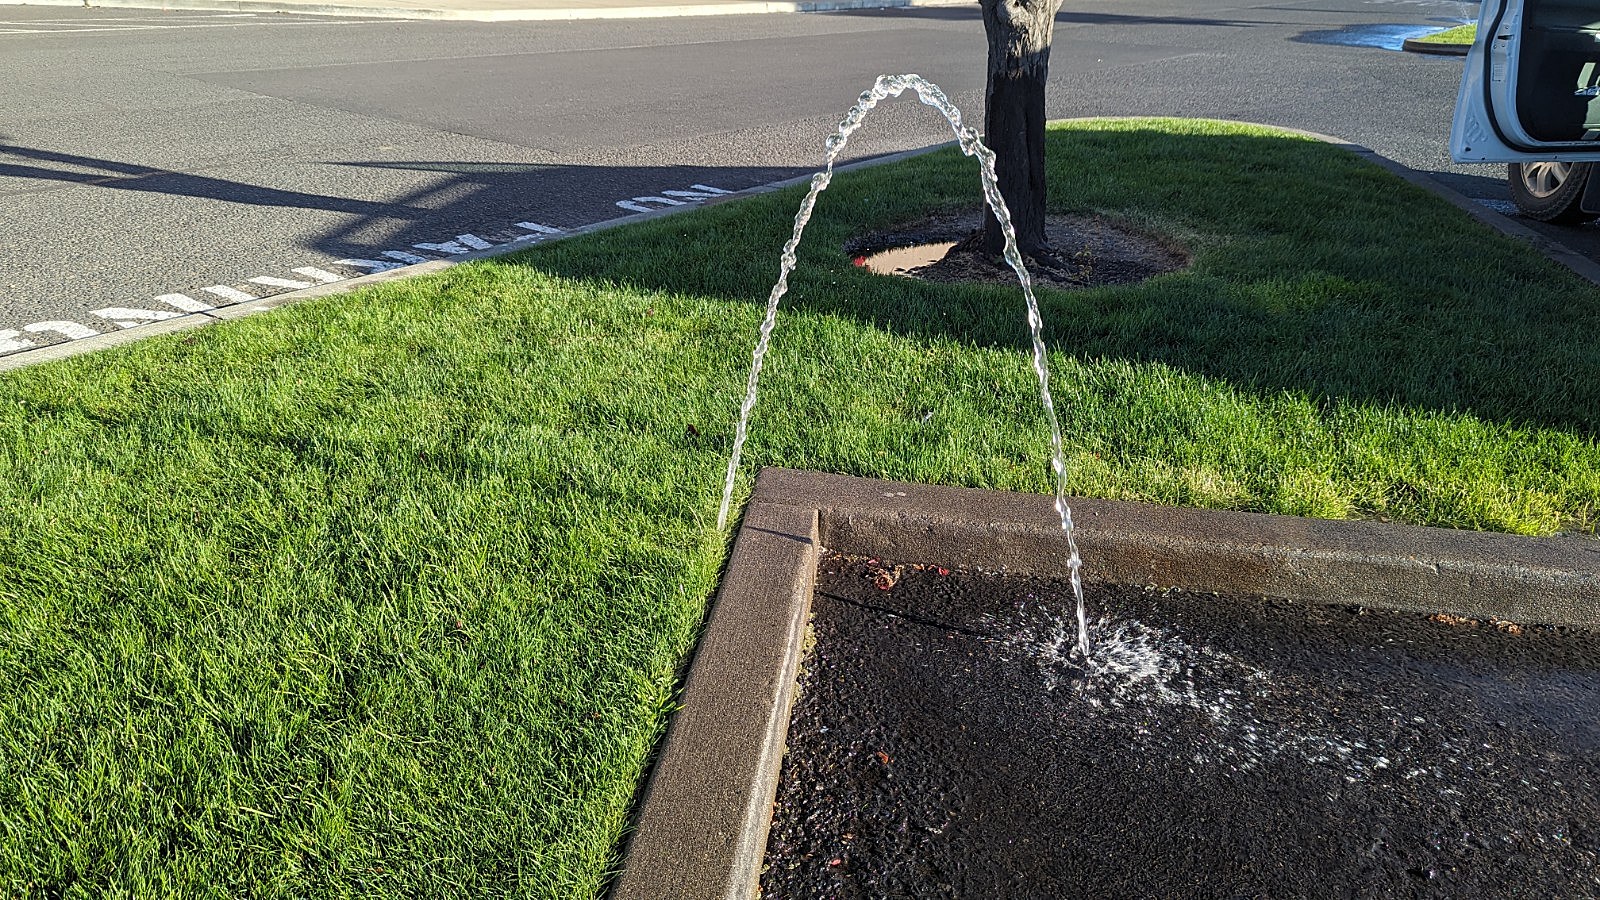 The Orchards Rivals Miller Park for Best Place for Water Fountains in Yakima